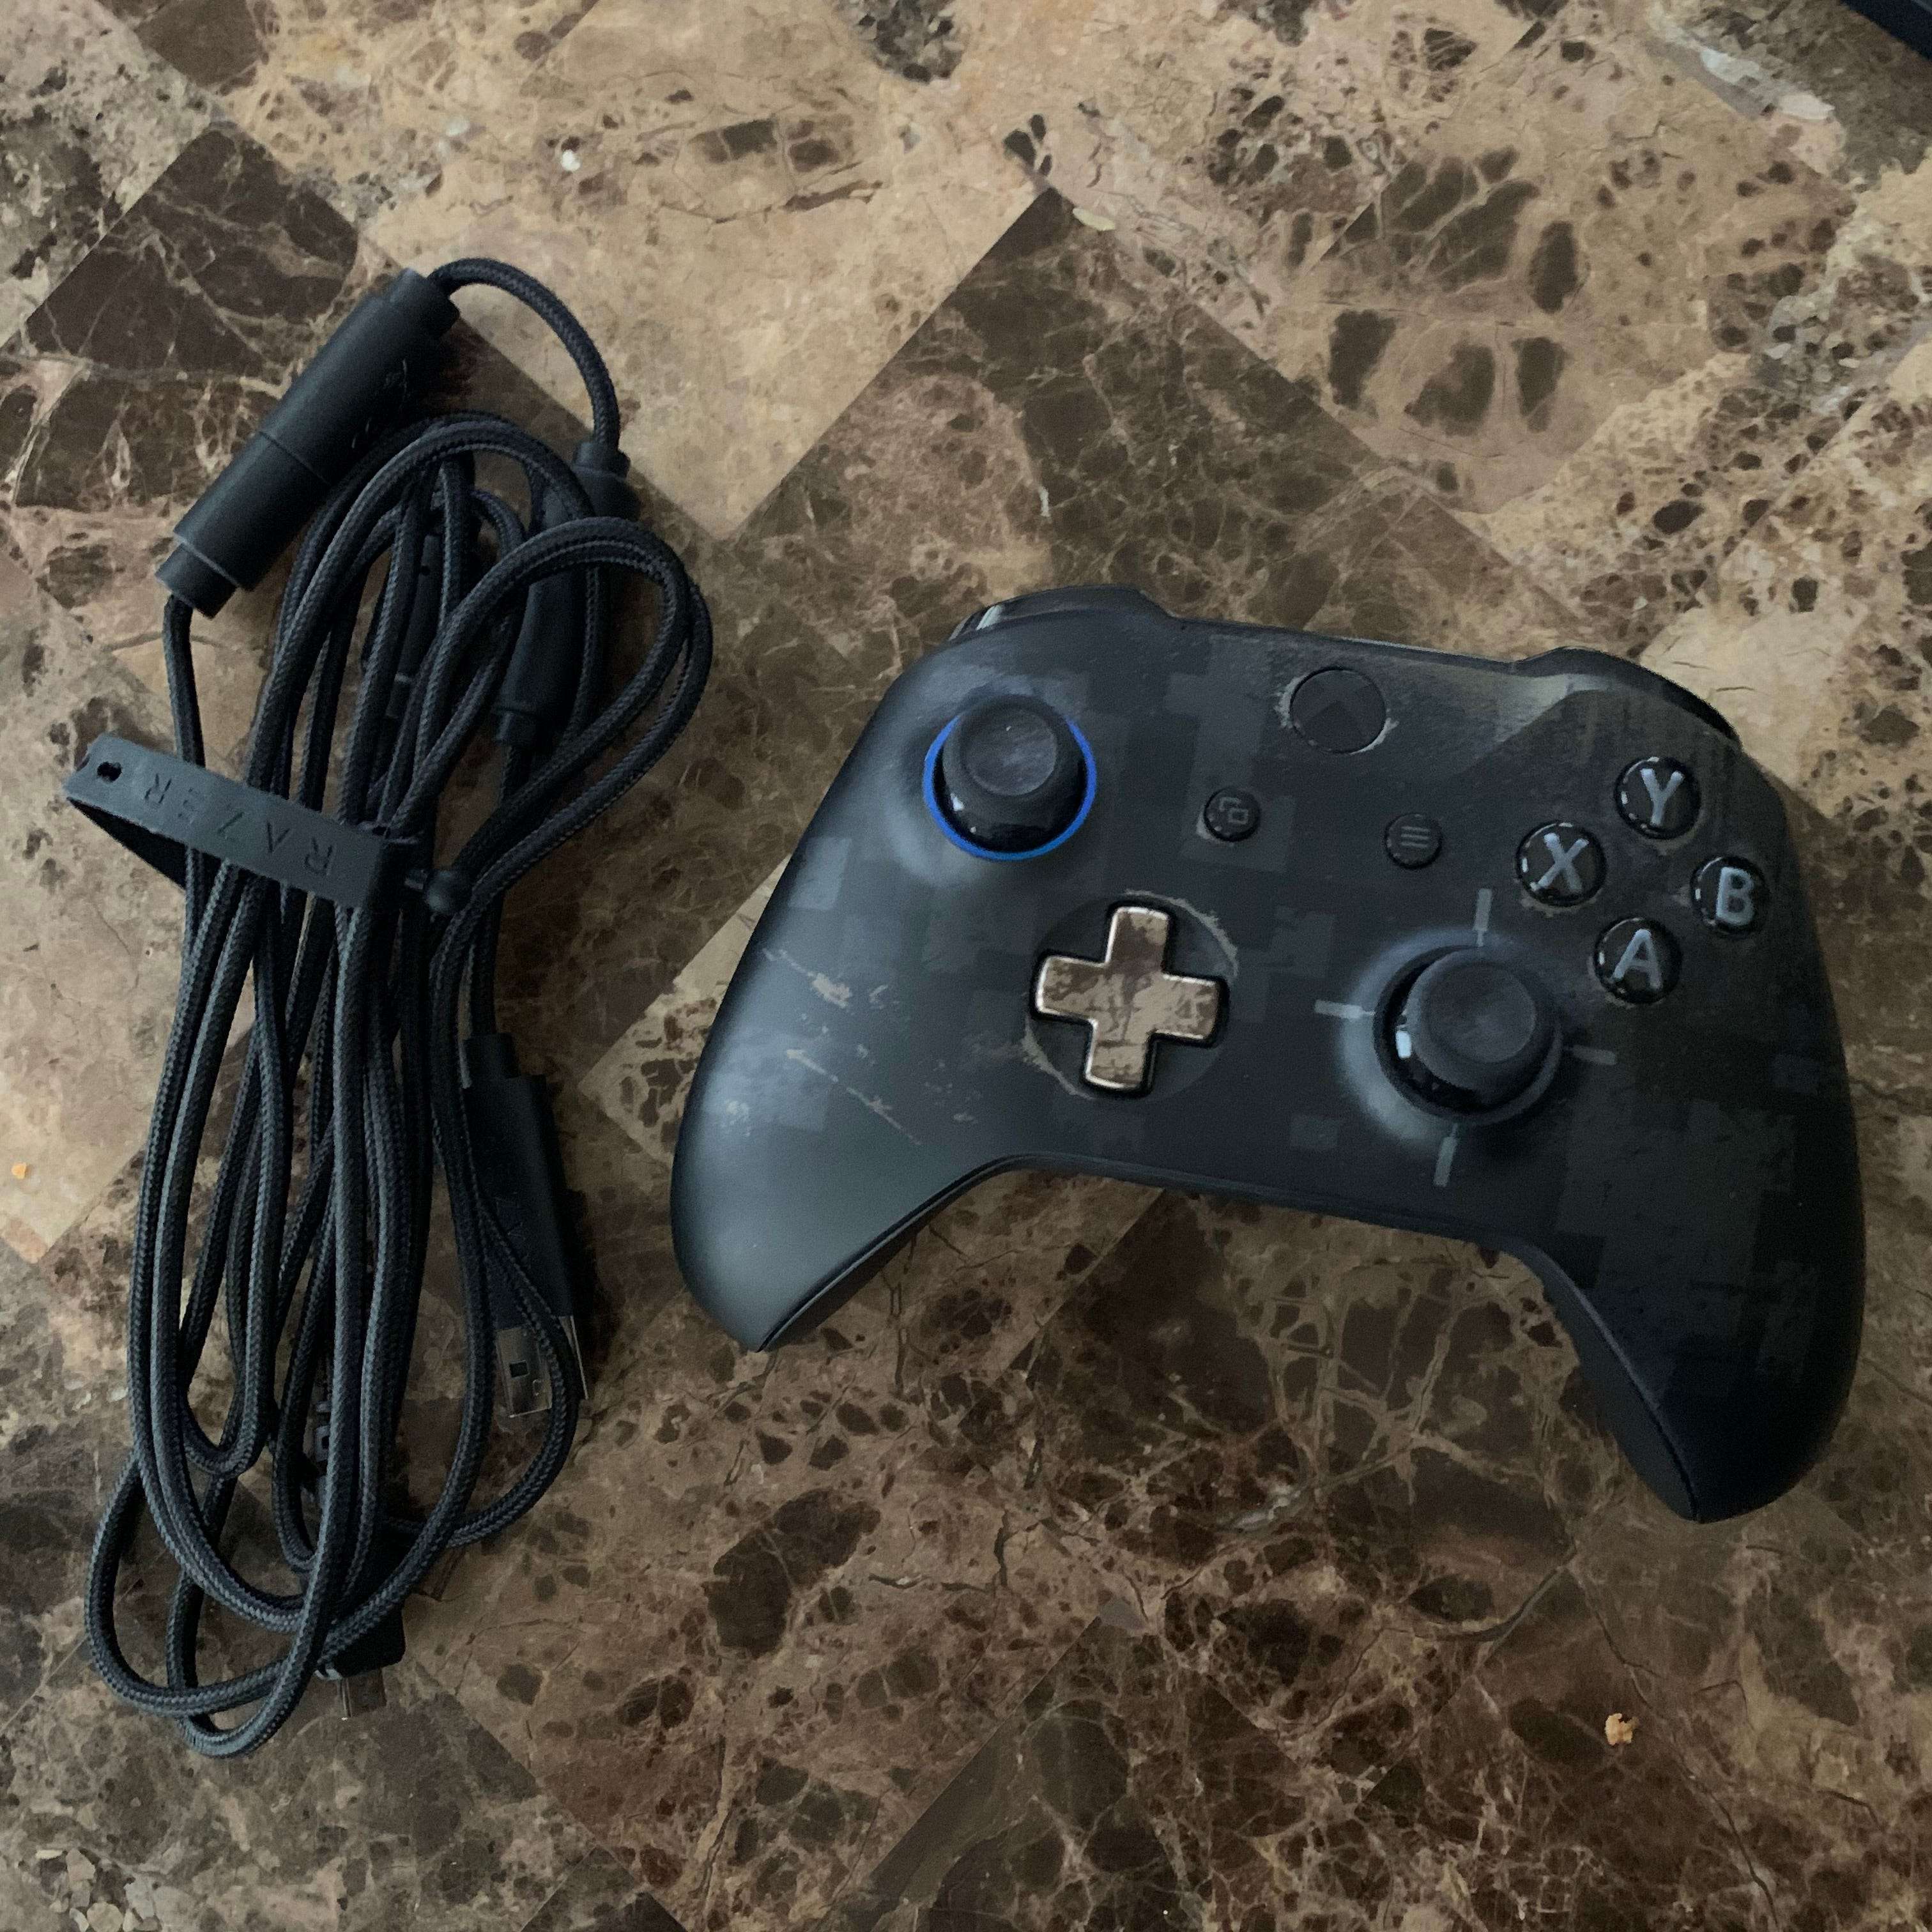 How to Connect Your Xbox Controller to a PC